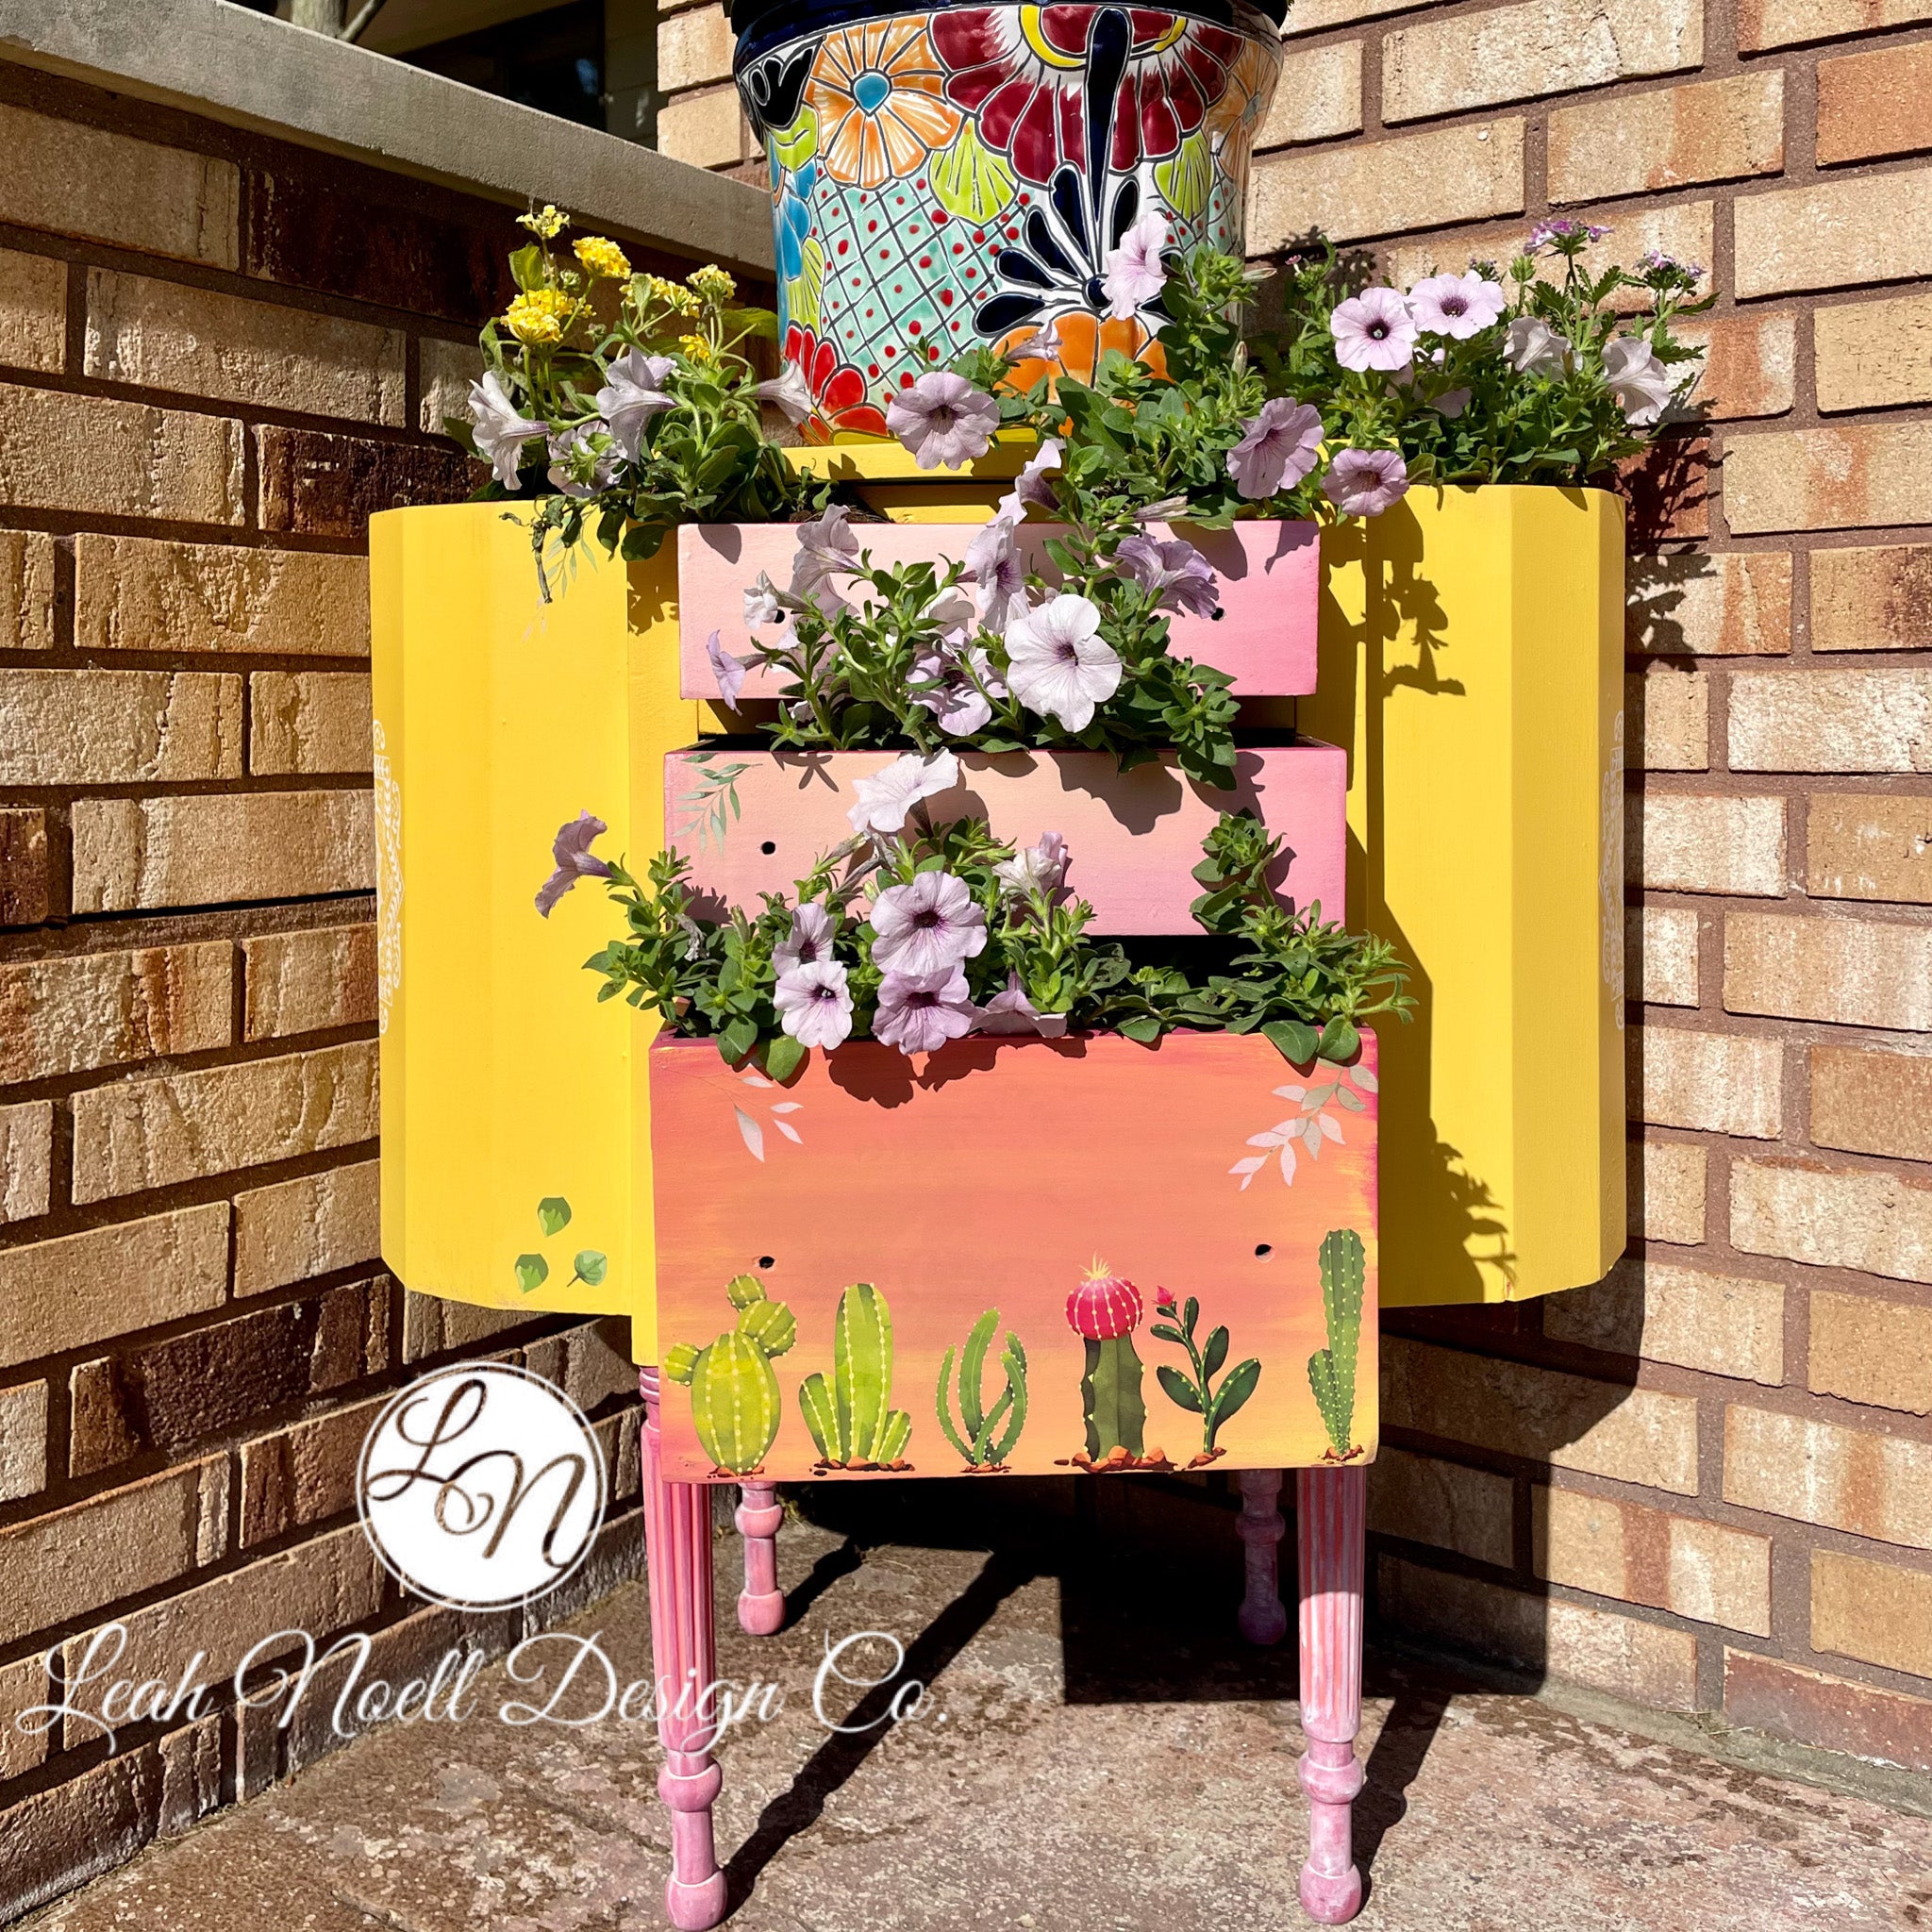 A vintage 3-drawer nightstand turned into a planter refurbished by Leah Noell Design Company is painted in Dixie Belle's Daisy chalk mineral paint. The drawers are an ombre of light pink down to coral pink with a painted cactus design.